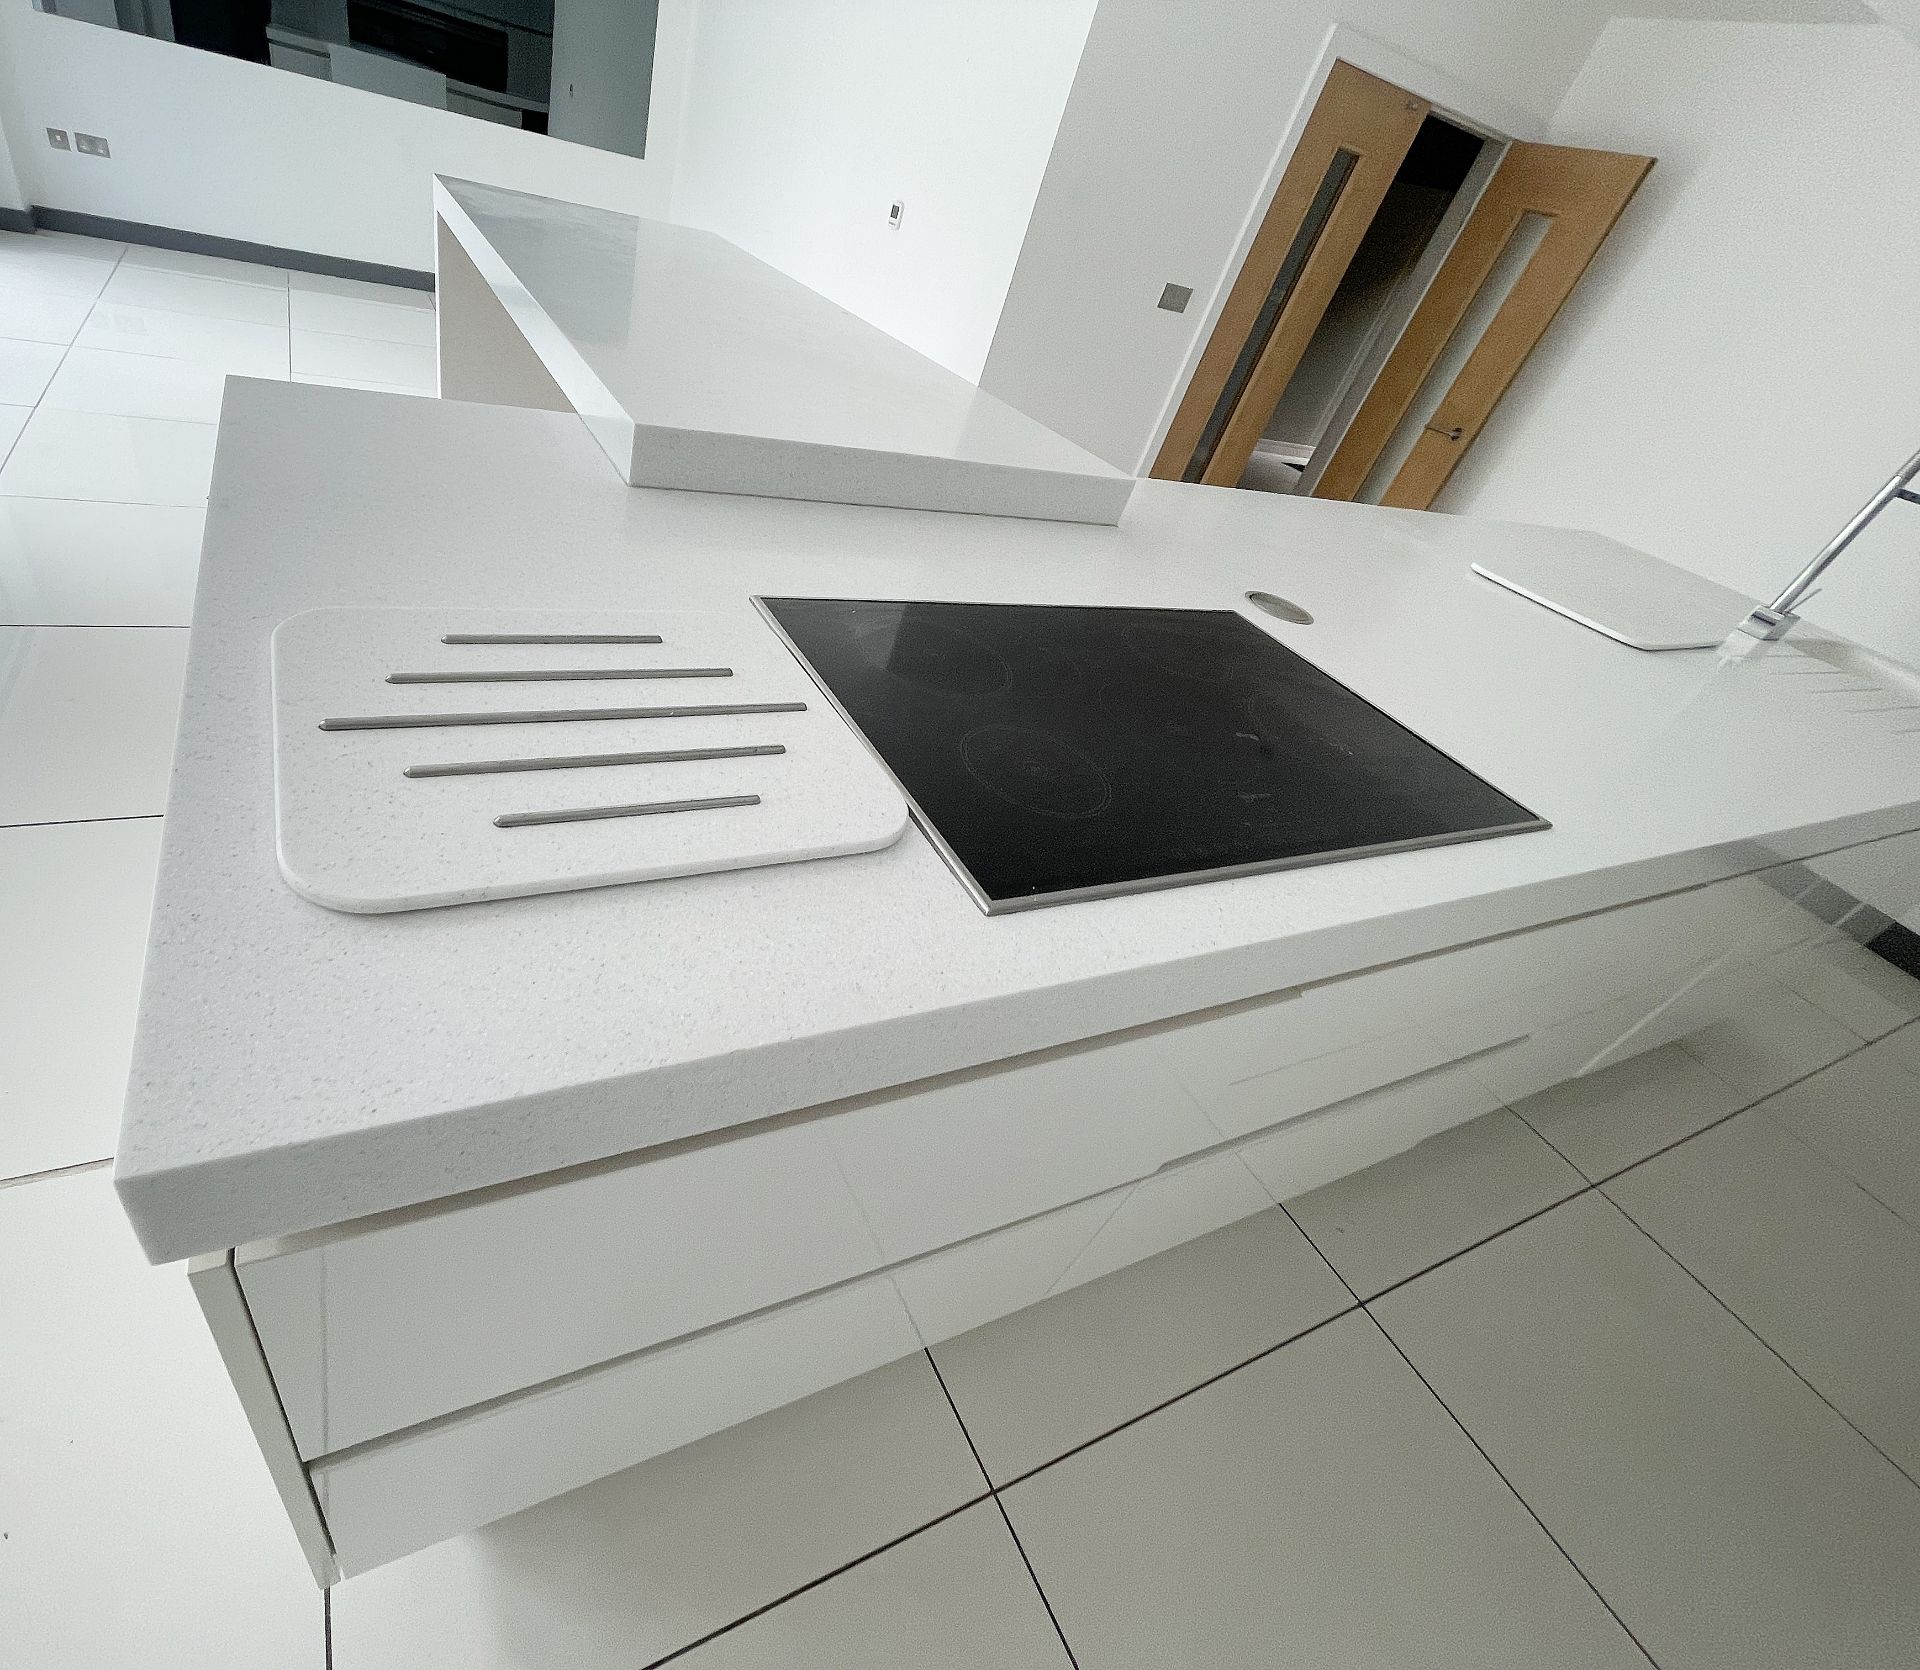 1 x SieMatic Contemporary Fitted Kitchen With Branded Appliances, Central Island + Corian Worktops - Image 9 of 100